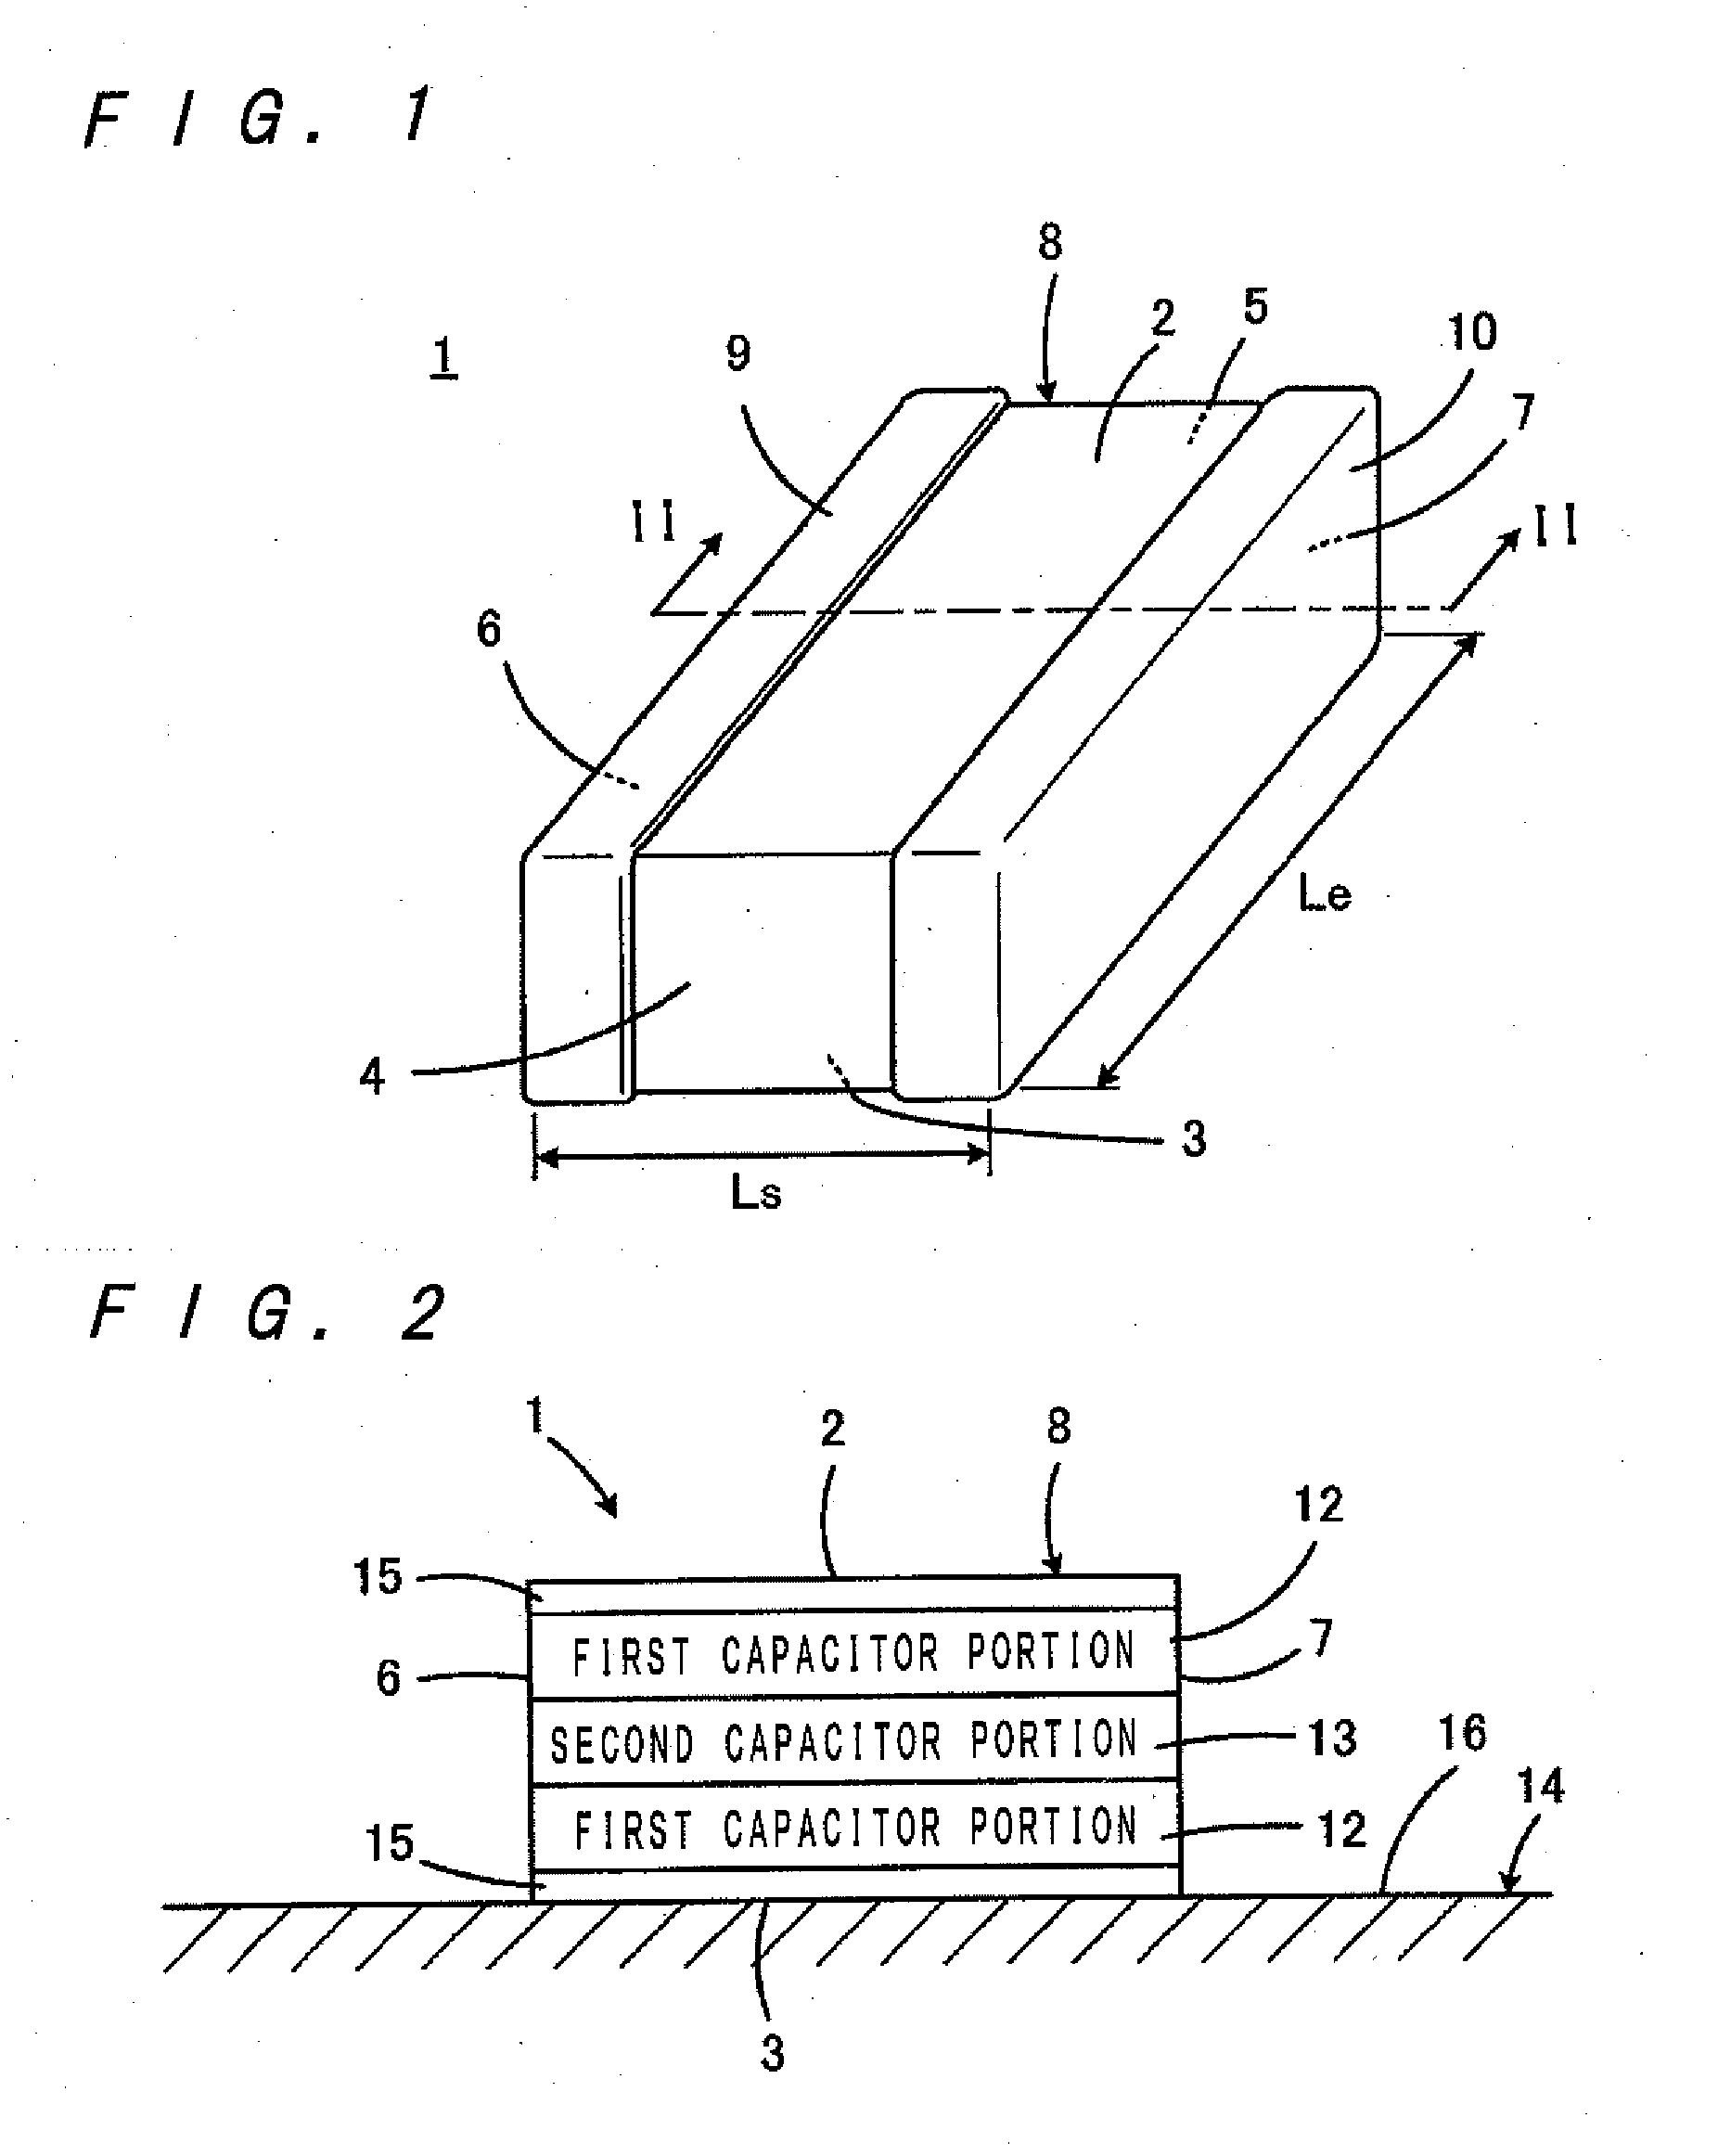 Multilayer capacitor having low equivalent series inductance and controlled equivalent series resistance